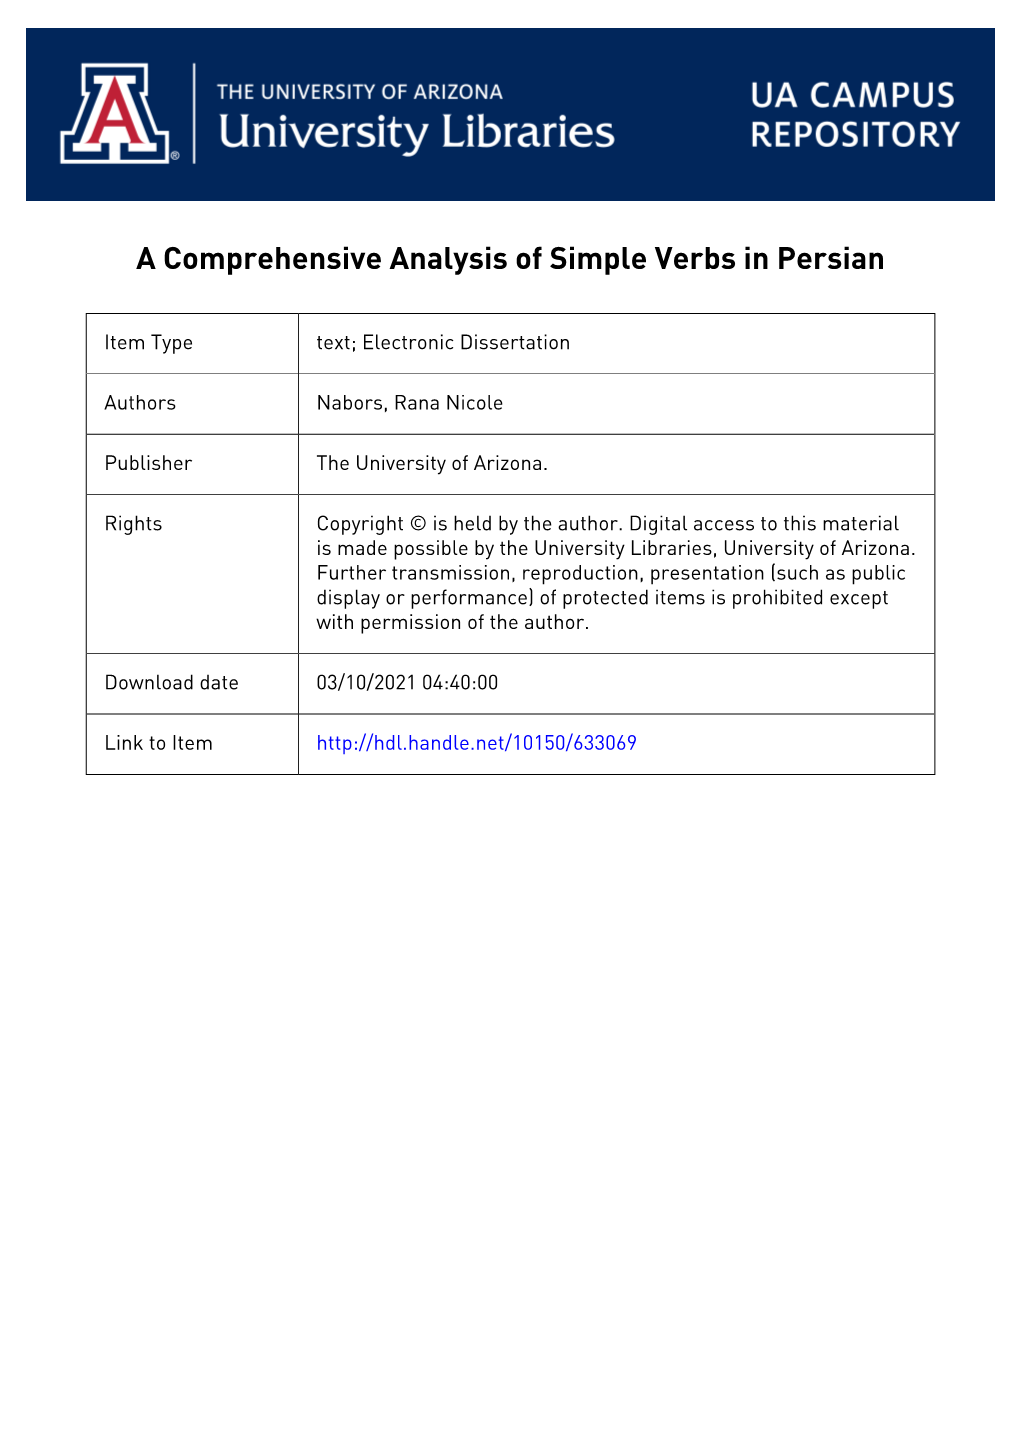 A COMPREHENSIVE ANALYSIS of SIMPLE VERBS in PERSIAN By